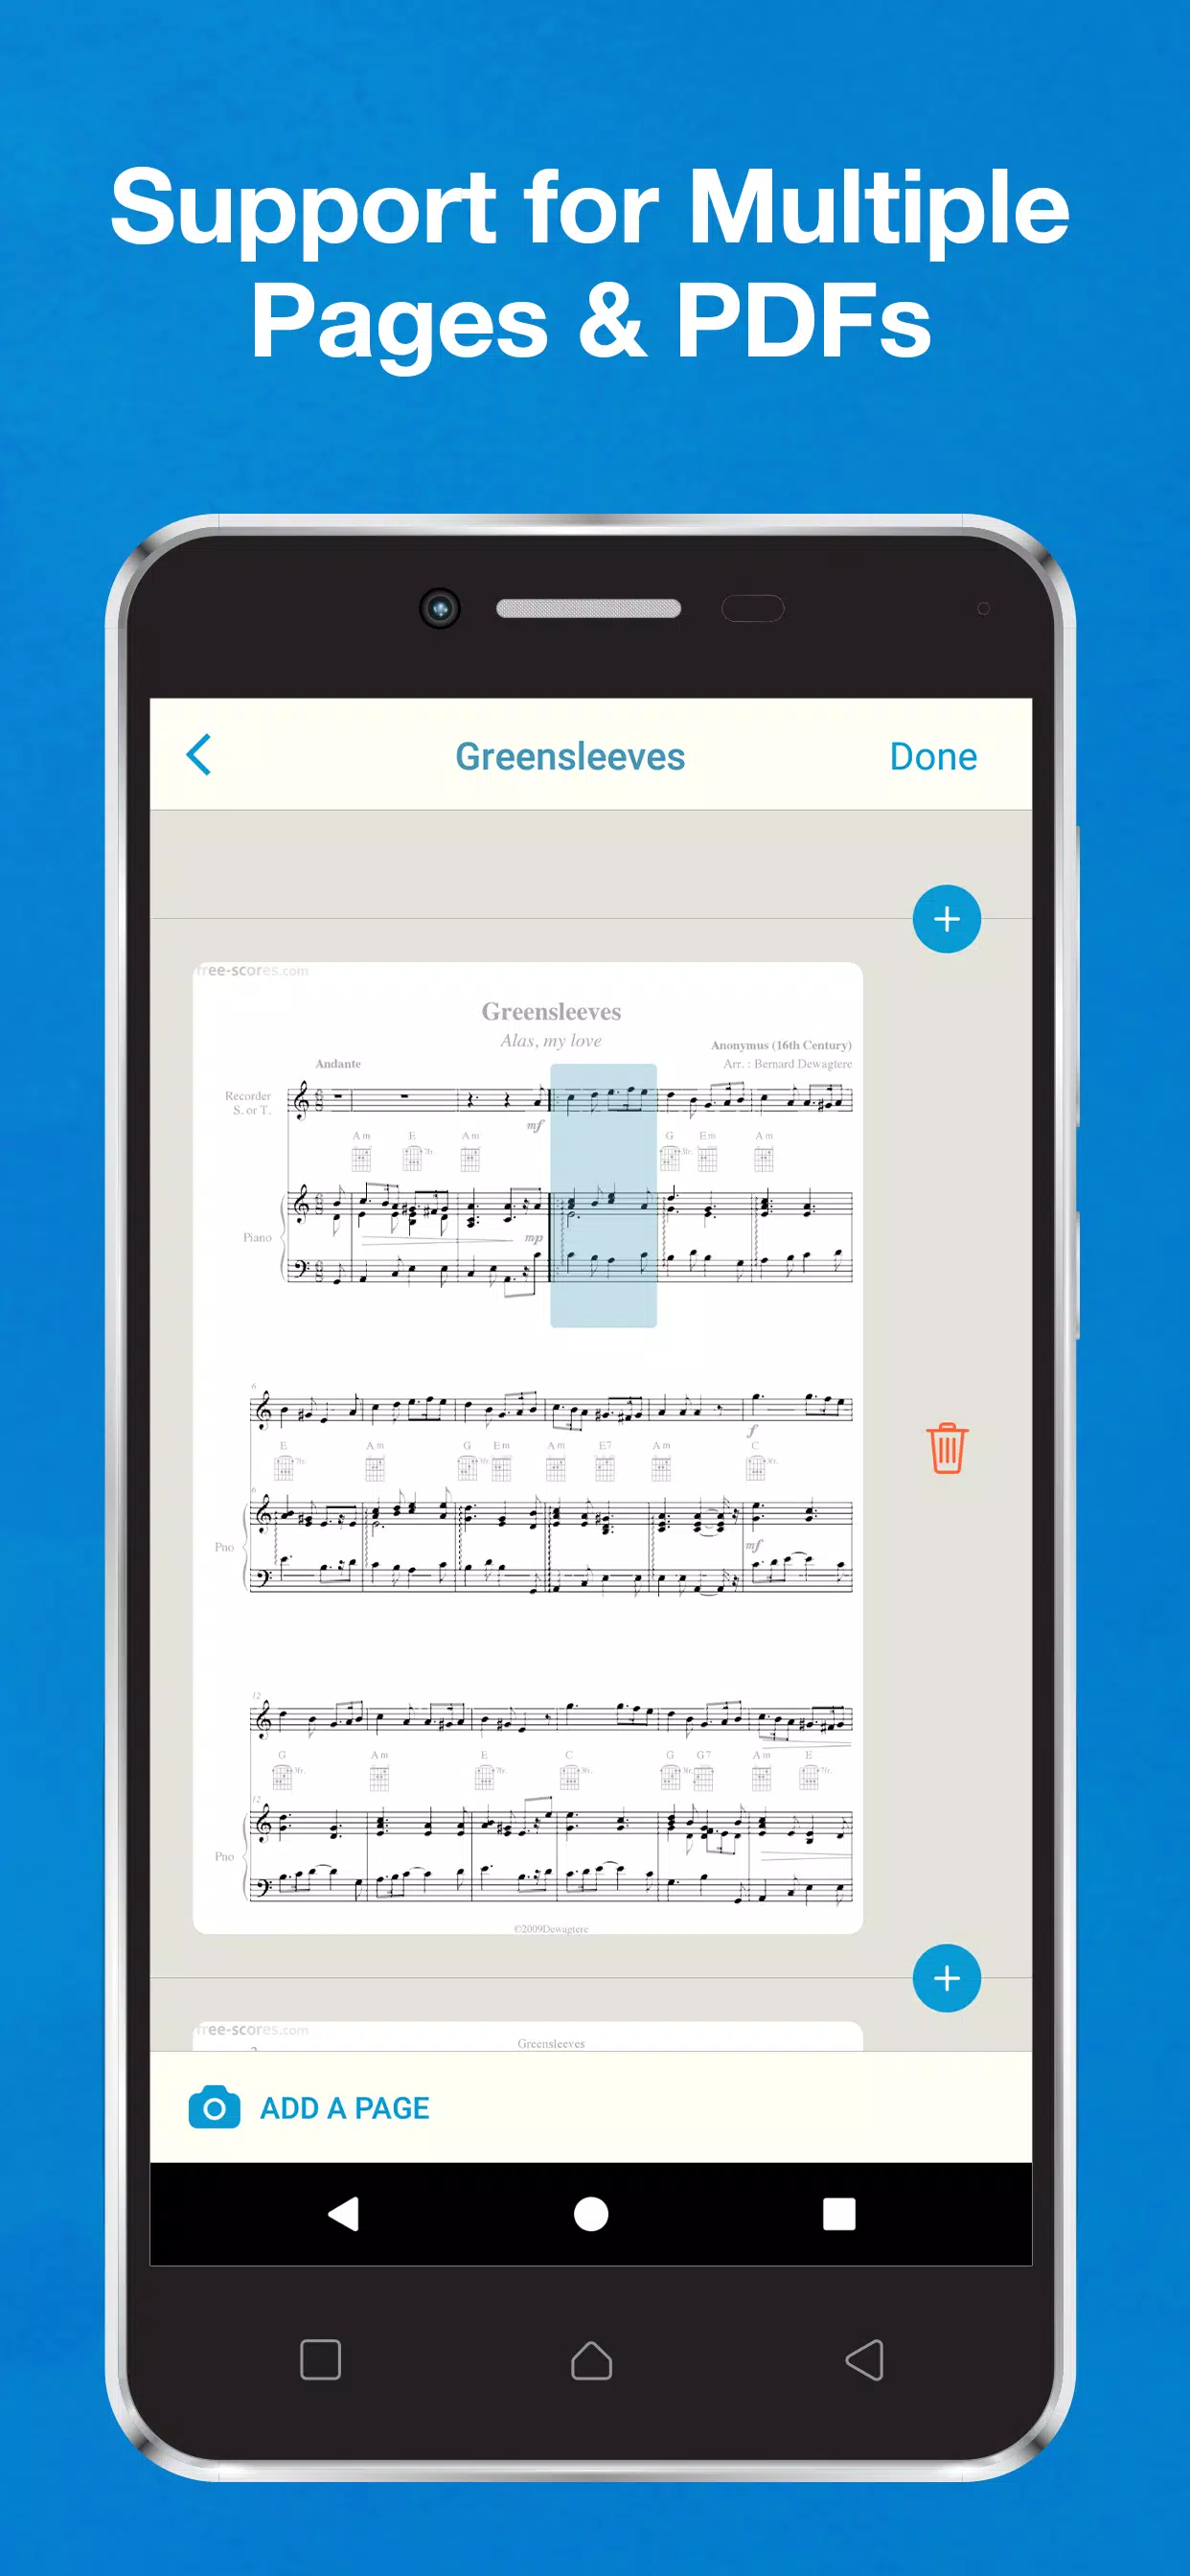 Sheet Music Scanner & Reader Latest Version 2.130 for Android